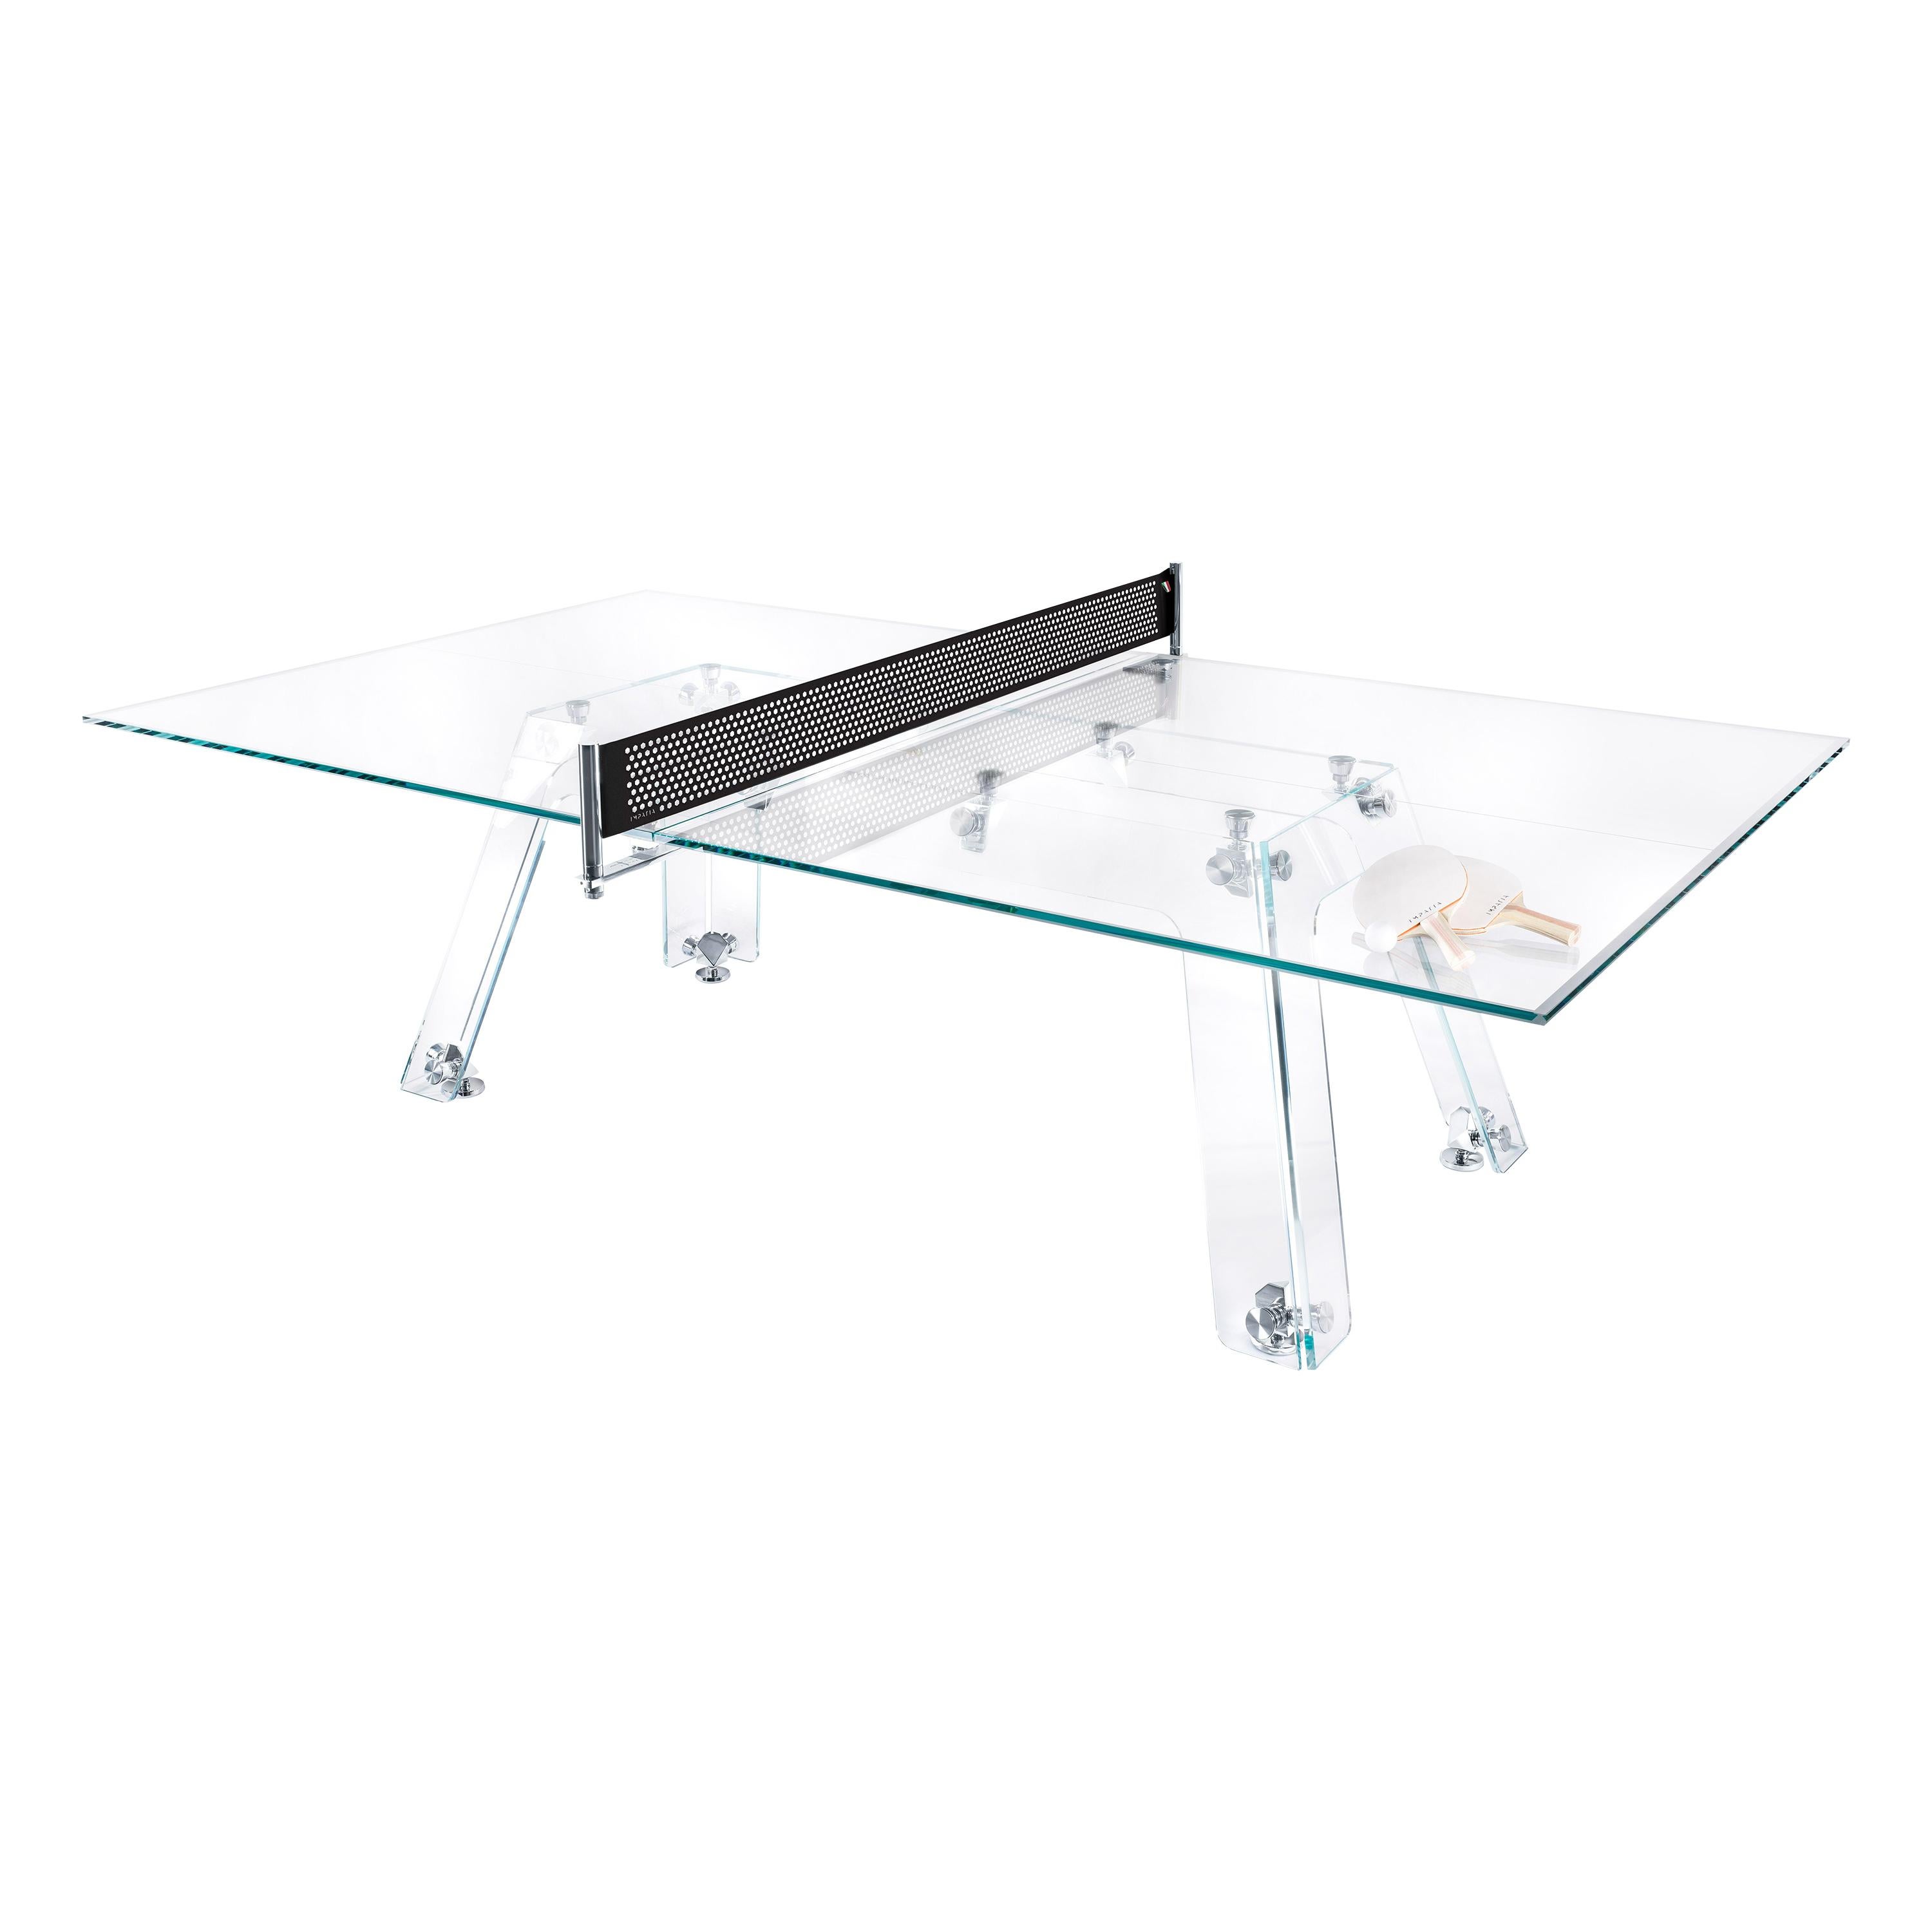 Modern Design Glass Ping Pong Table With Removable Net by Impatia